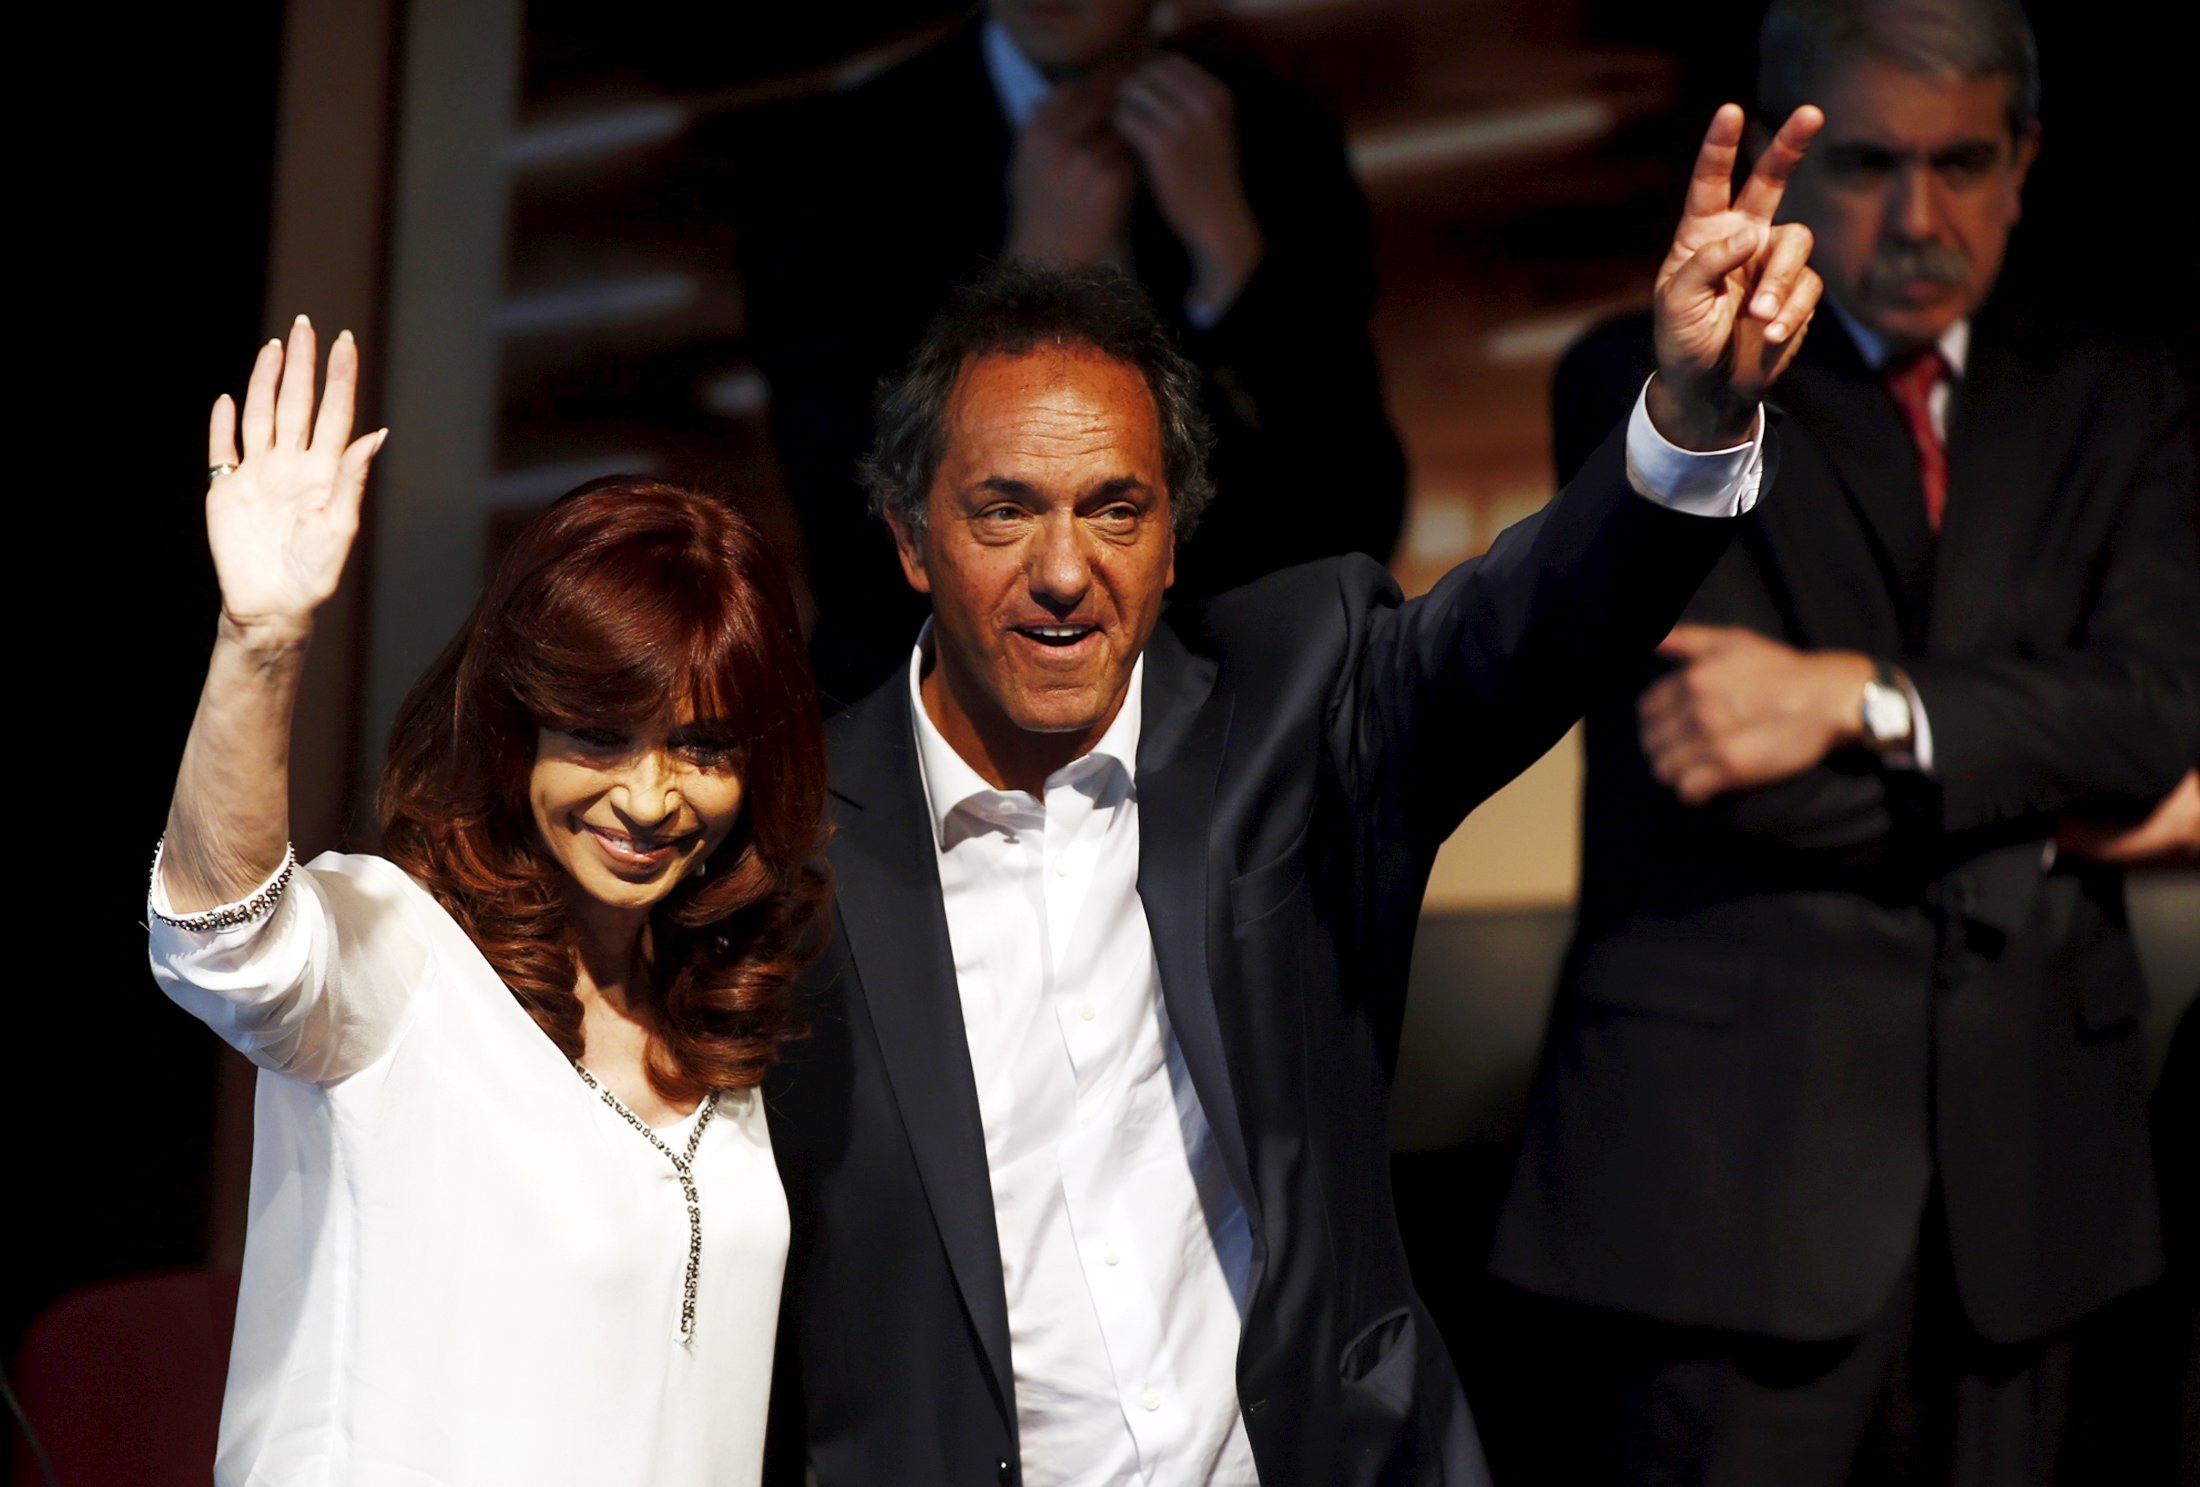 Argentina's President Cristina Fernandez and presidential candidate Scioli gesture during a ceremony in Buenos Aires.